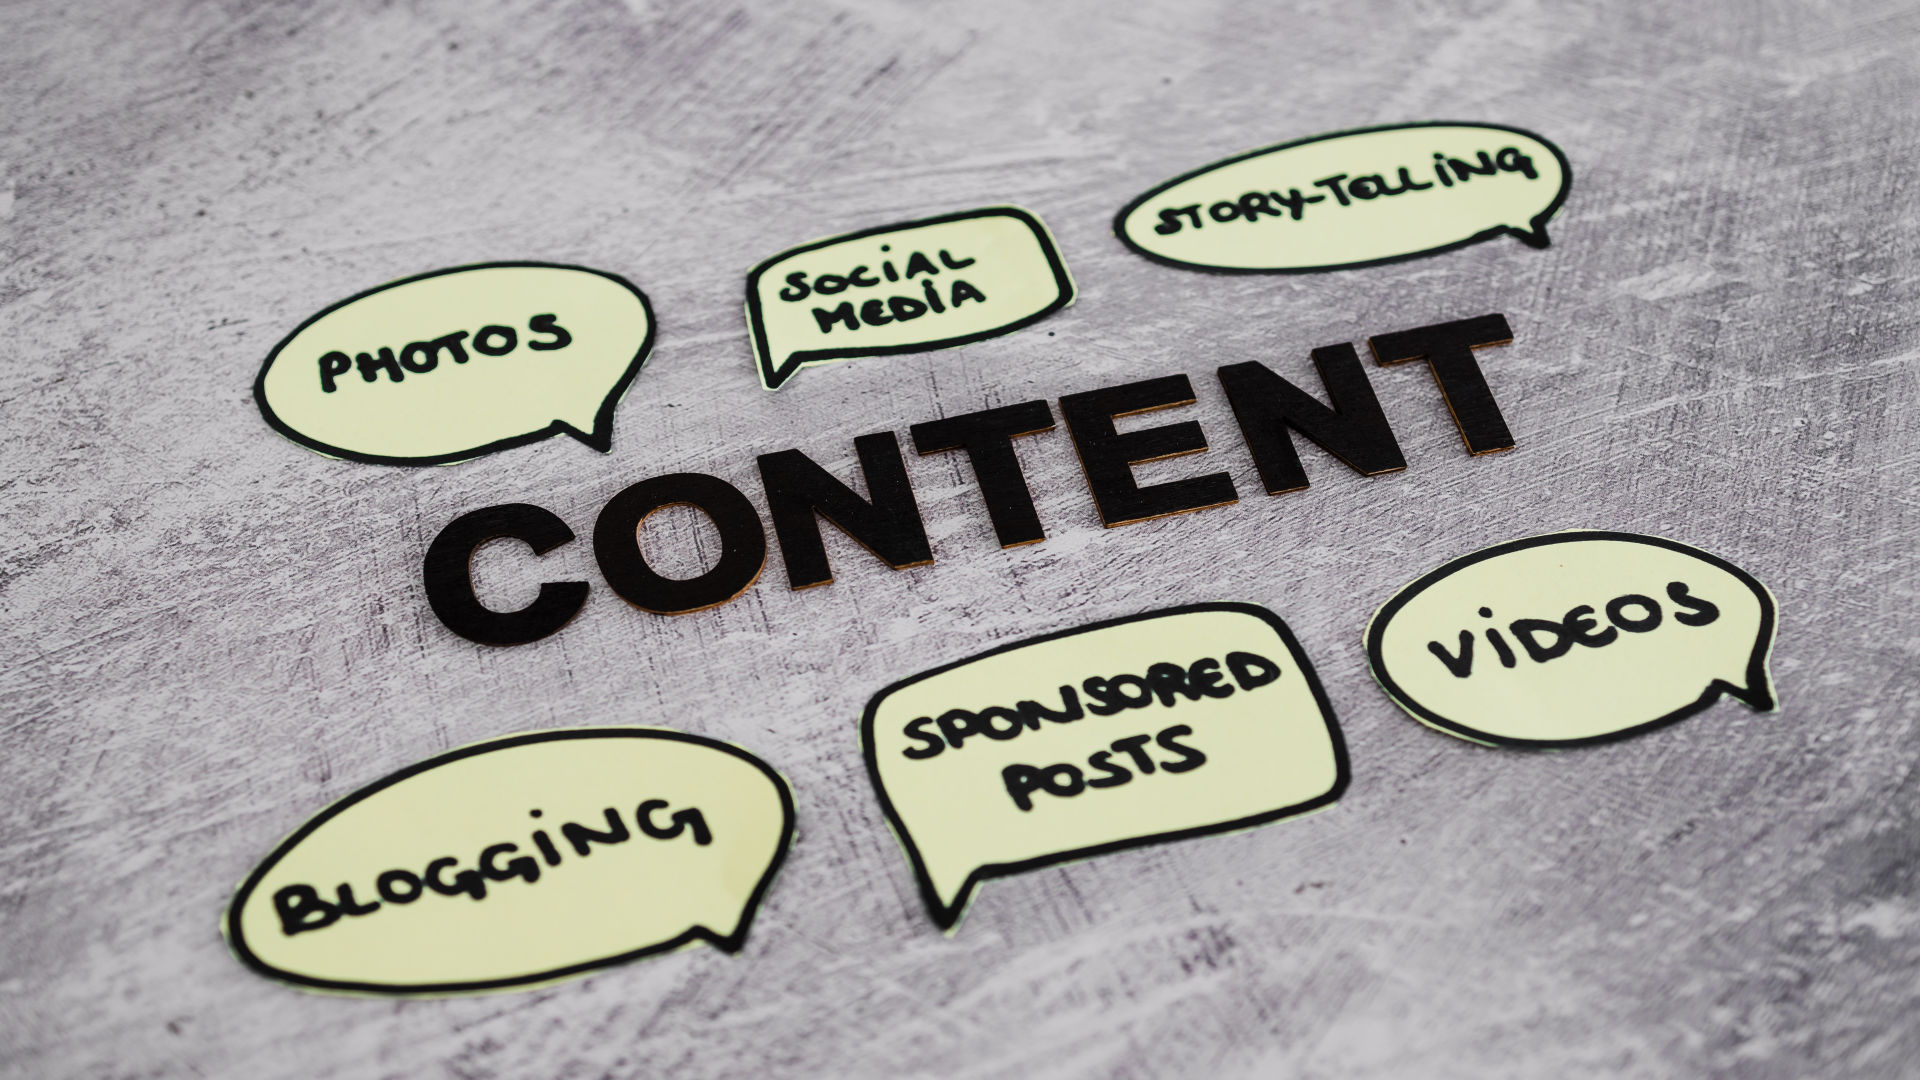 A image shows content marketing includes blogging, video, posts, photos, social media and story-telling